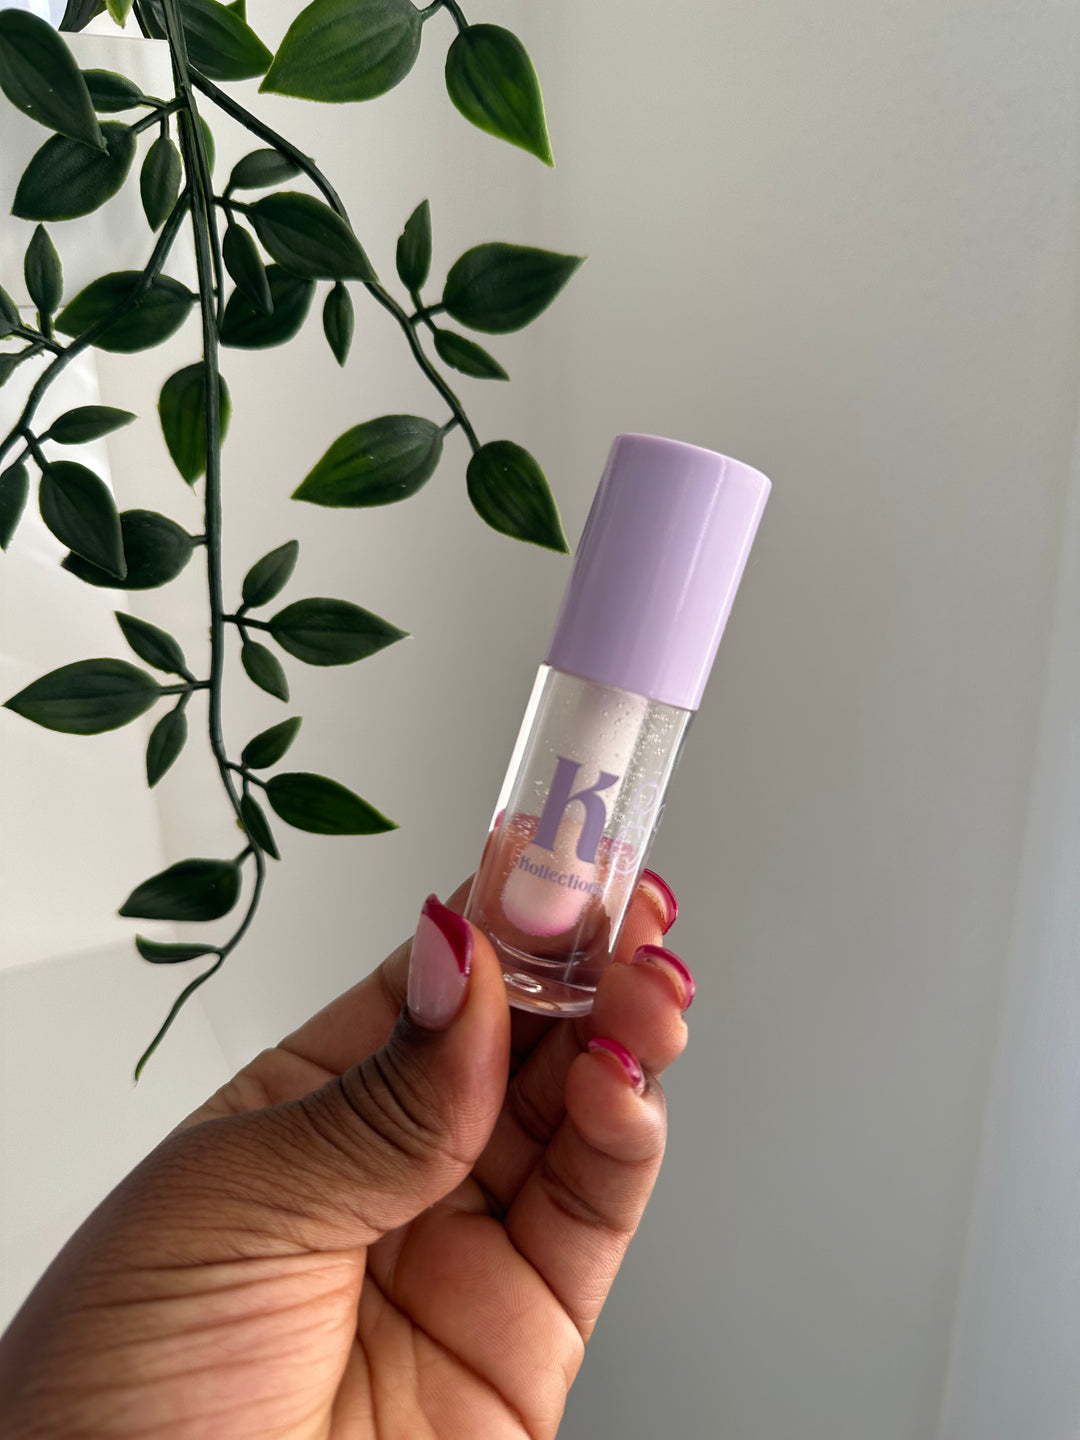 Color Changing Lip Oil